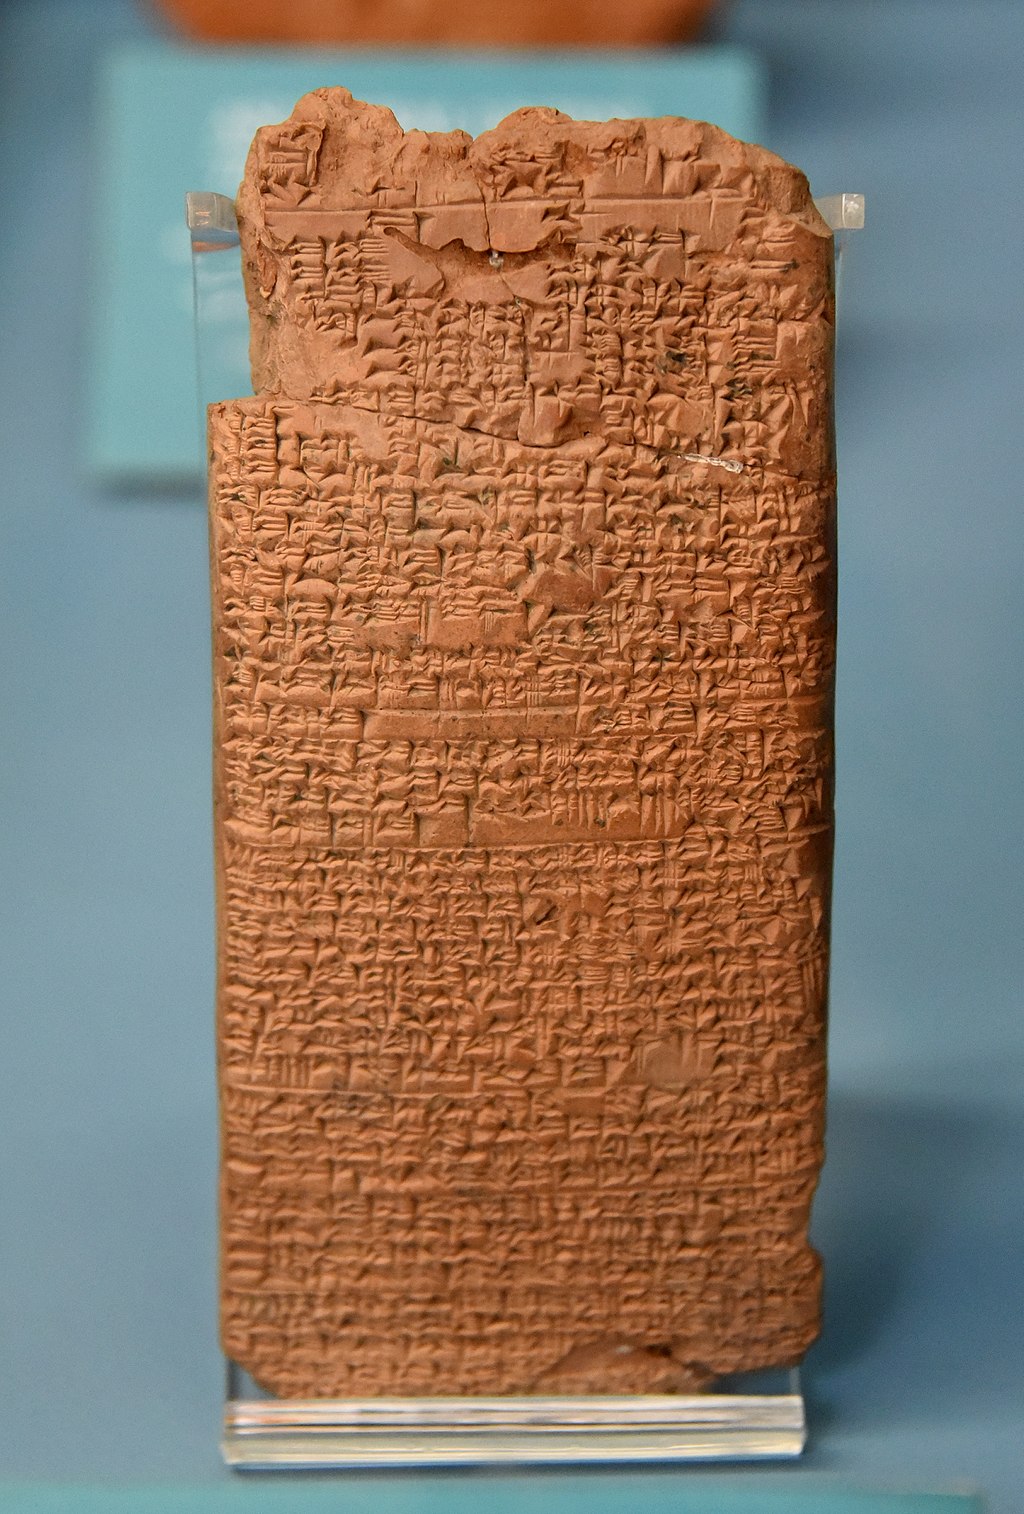 A medical recipe concerning poisoning written in Cuneiform from Nippur, Iraq, 18th century BCE